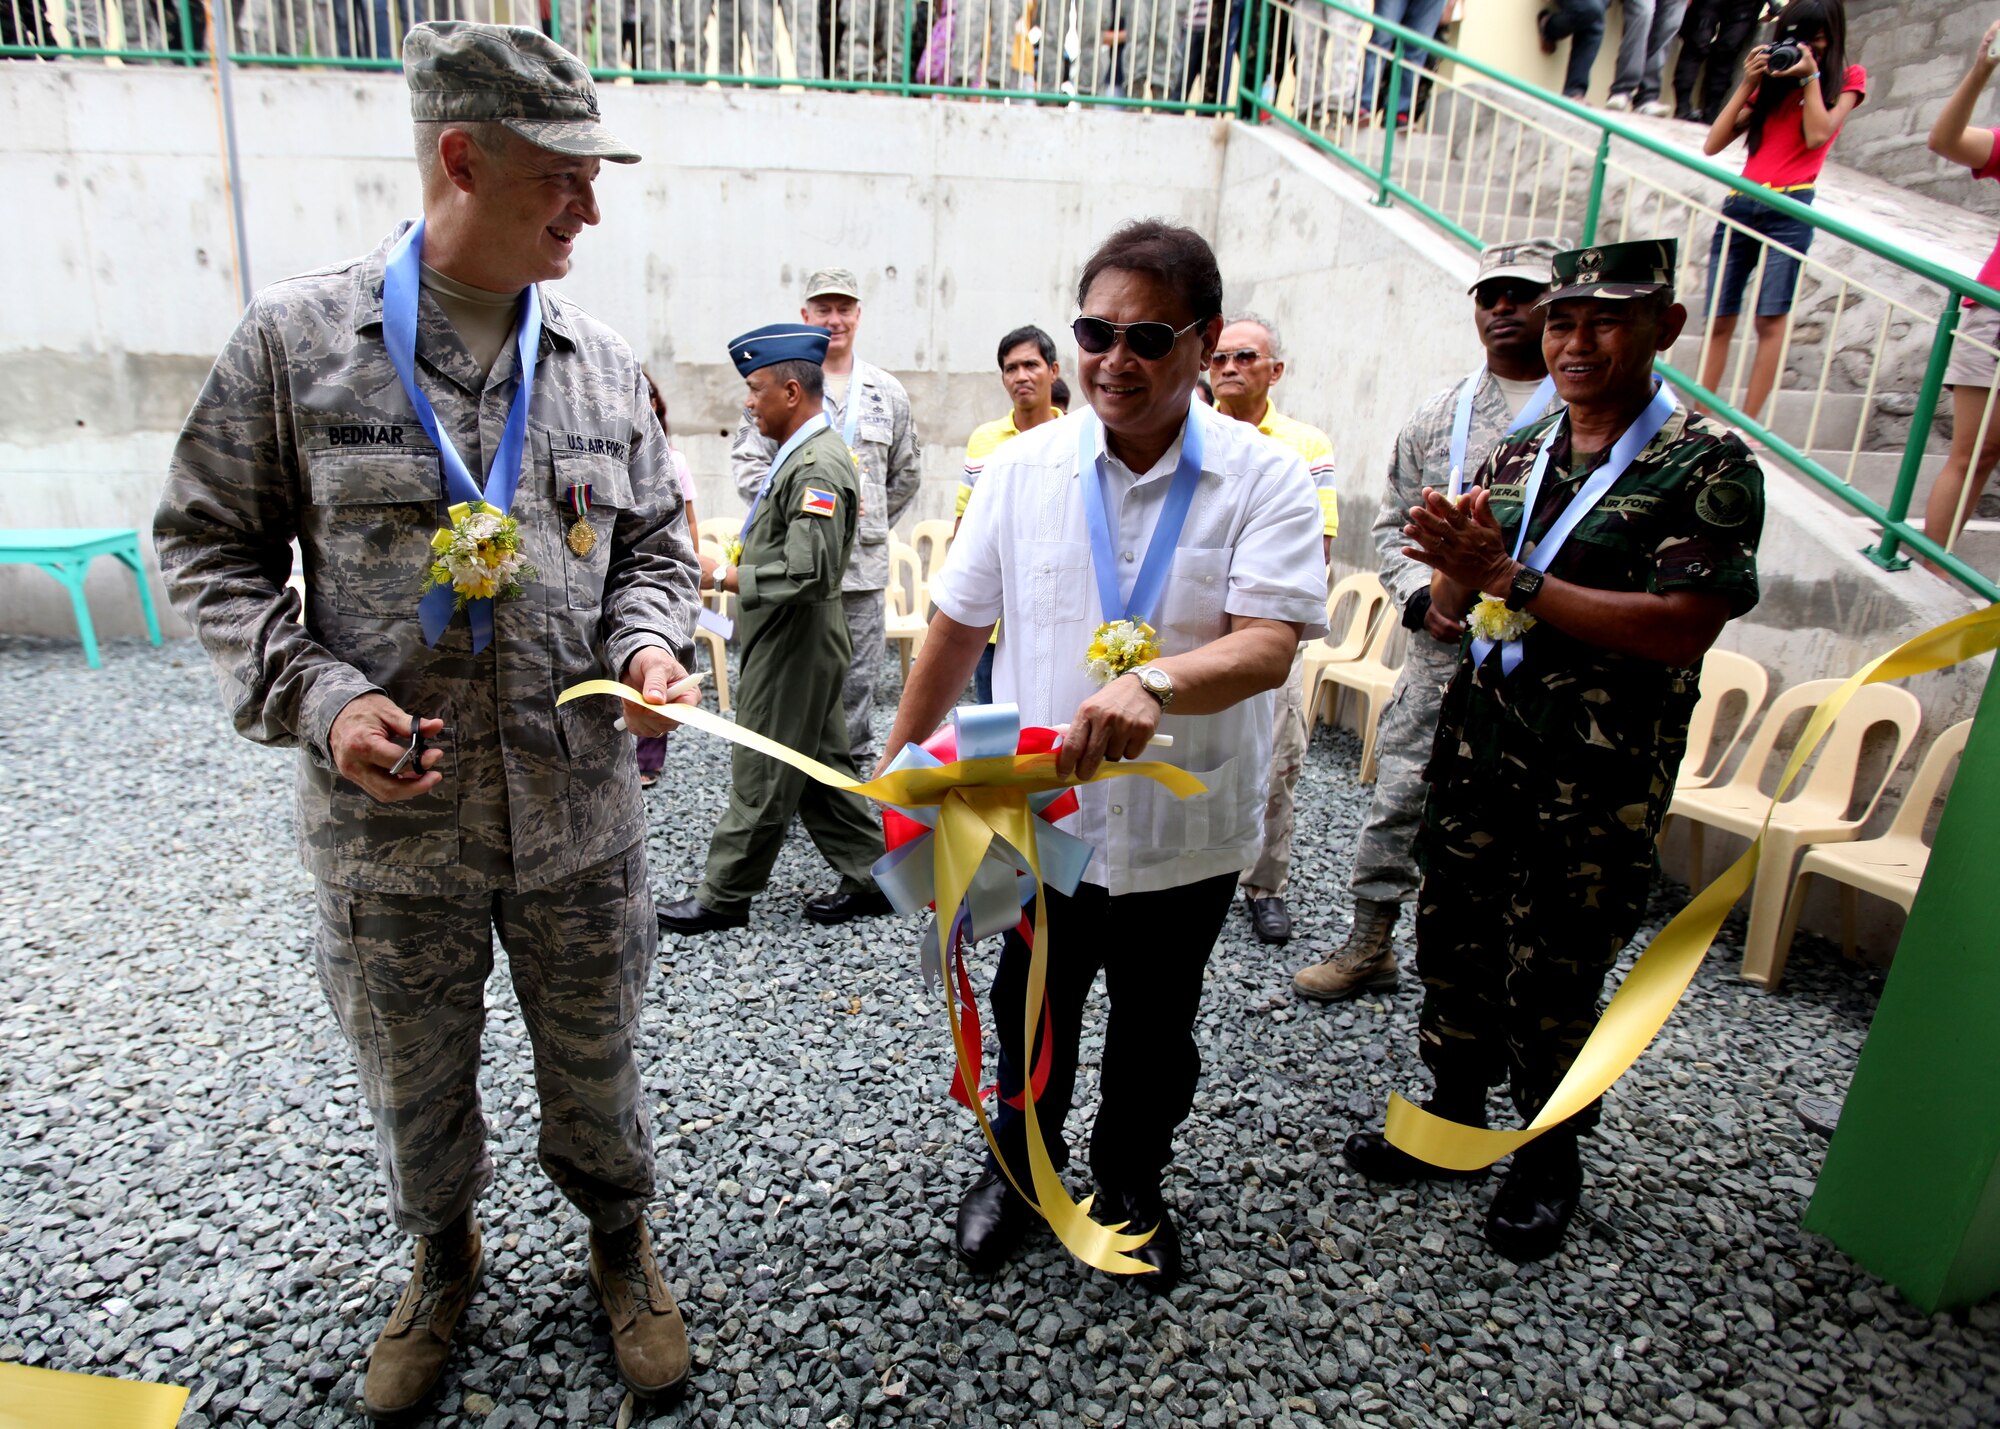 U.S. Air Force Col Mark Bednar stands with Mayor
Marino Morales after cutting the ribbon during a
dedication ceremony at Clark Air Force Base, Republic
of the Philippines on September 20, 2012. U.S. Air Force
Civil Engineering Squad 647 out of Joint Base Pearl
Harbor teamed up with the Republic of the Philippines
Air Force to build an addition onto a local schoolhouse
before dedicating it to the community. The U.S. military
and Republic of the Philippines military work together
to strengthen interoperability between the Philippine
and U.S. government. (U.S. Marine Corps photo by LCpl
Katelyn Hunter/Released).